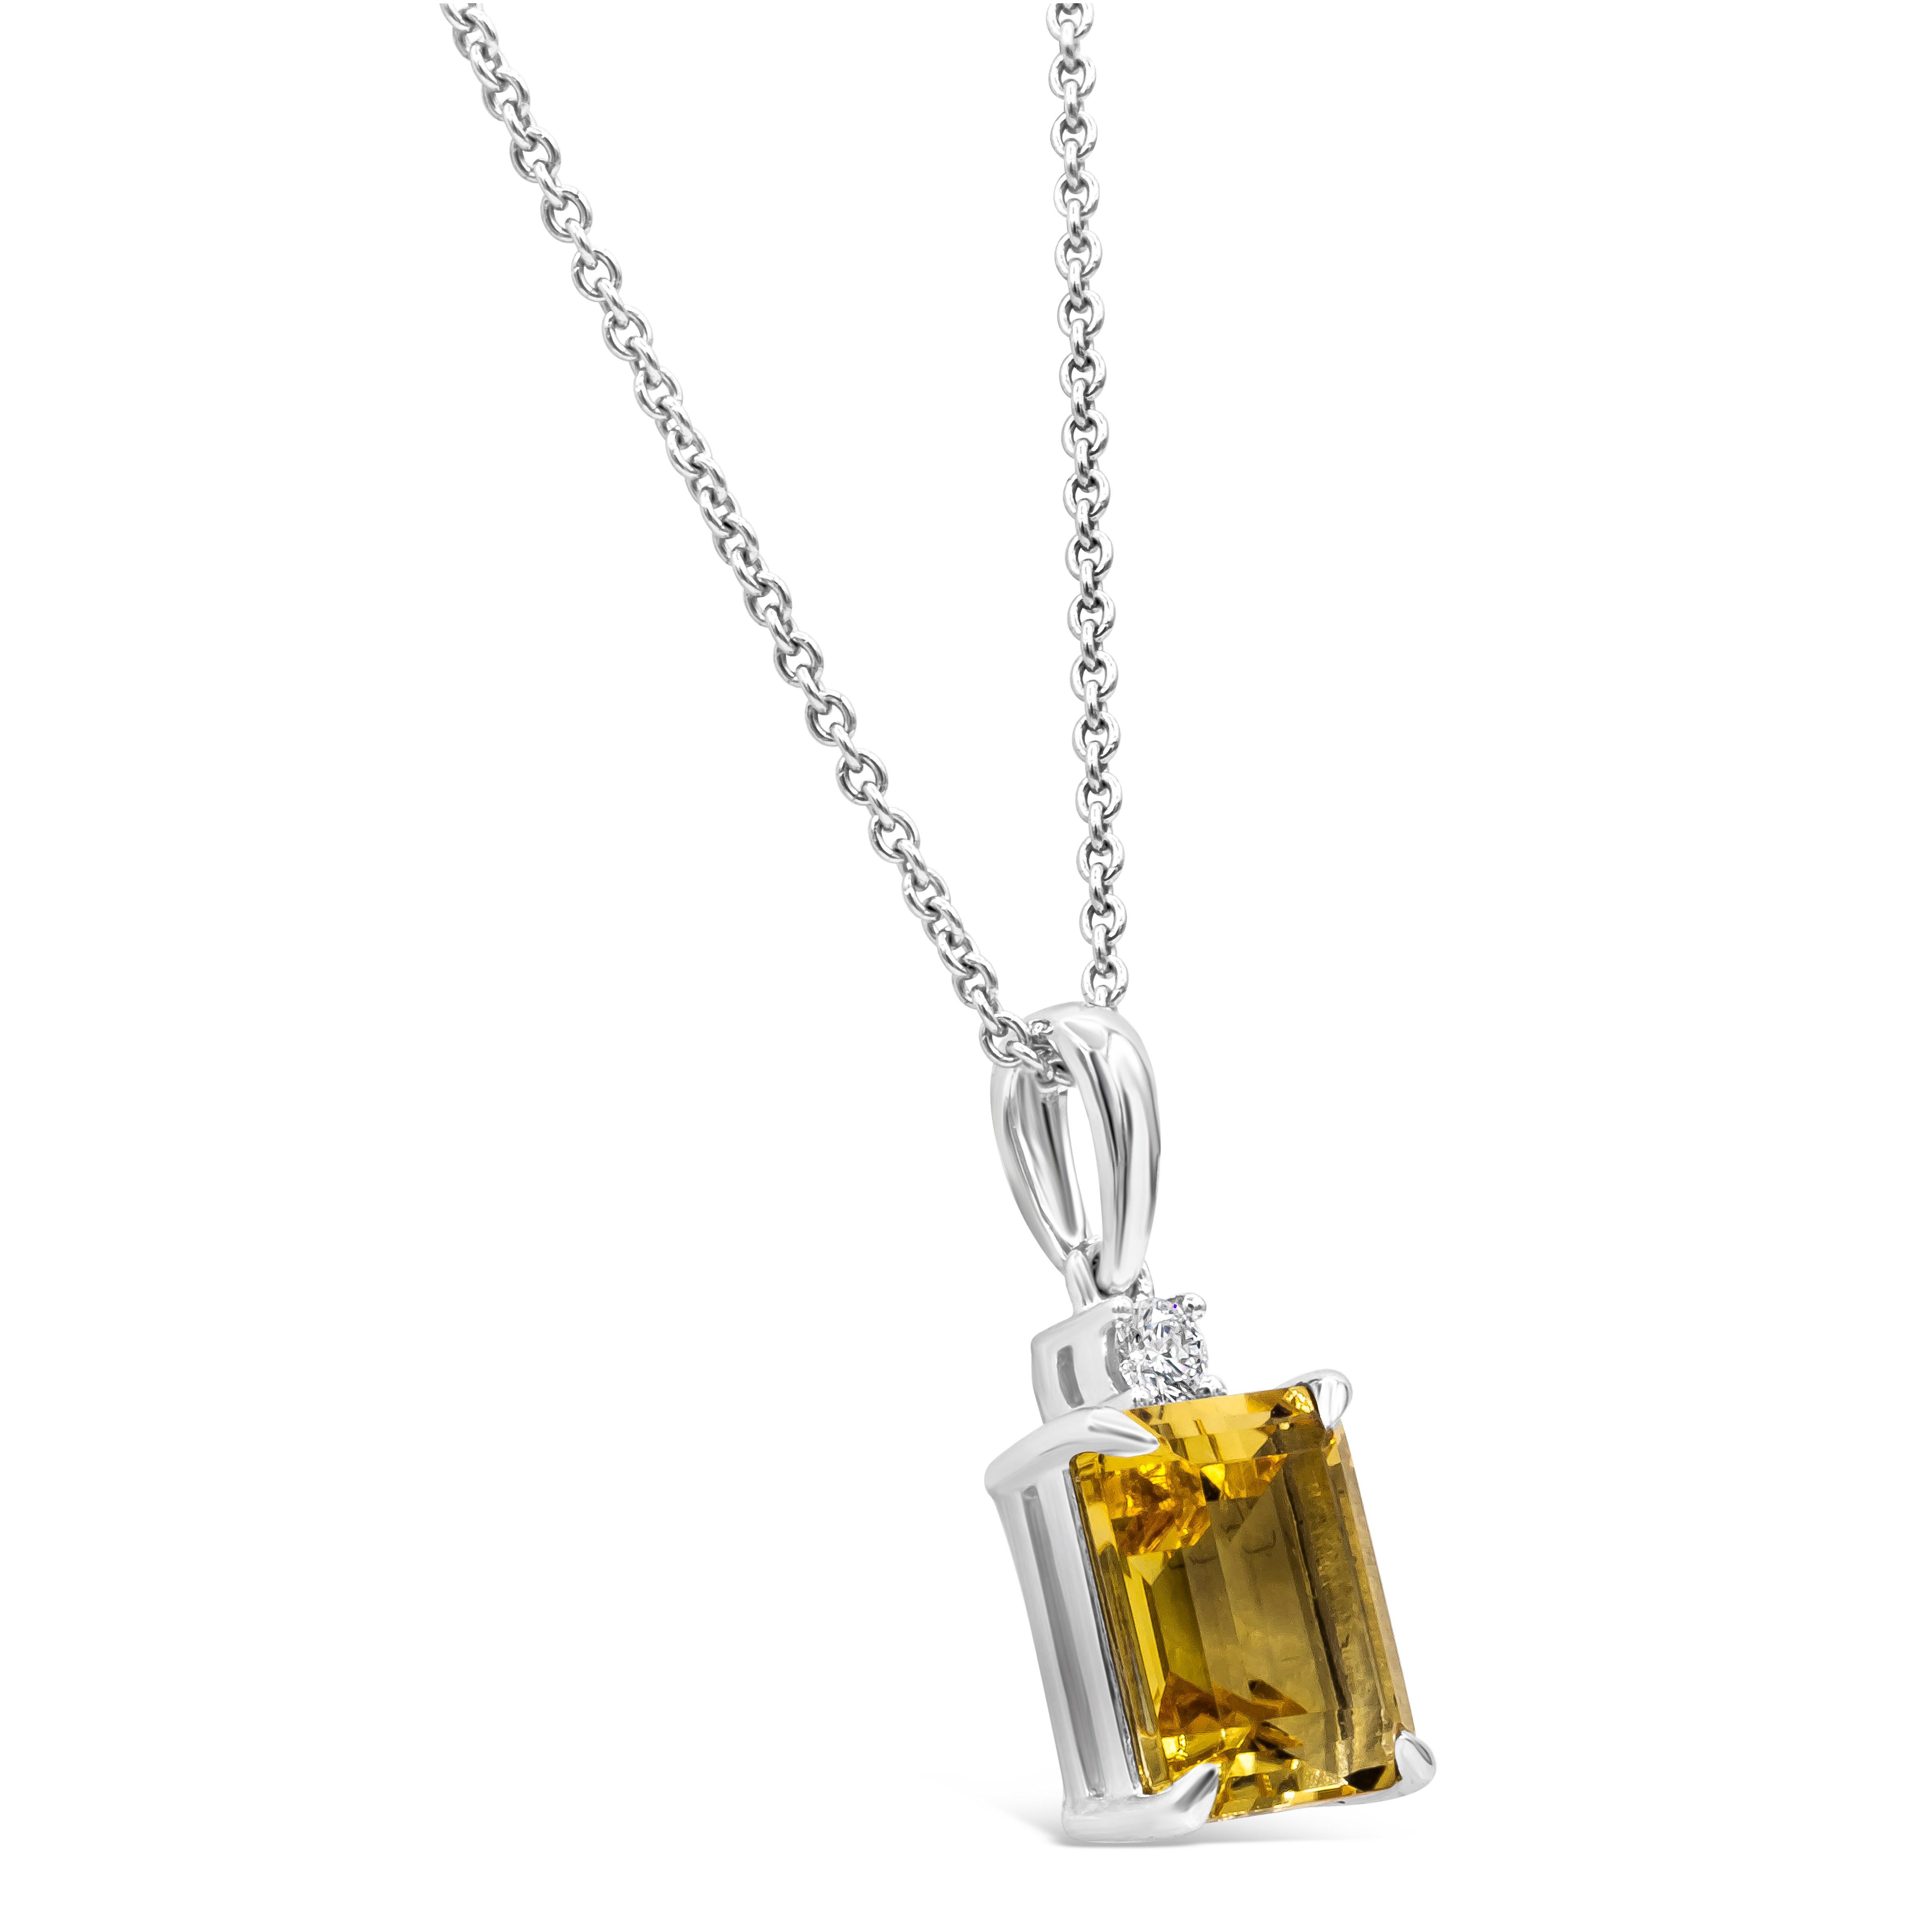 A simple pendant necklace showcasing a 2.39 carat emerald cut citrine, accented by a single round diamond on top of the center stone. Made in 18 karat white gold. Suspended on a 16 inch chain (adjustable upon request).

